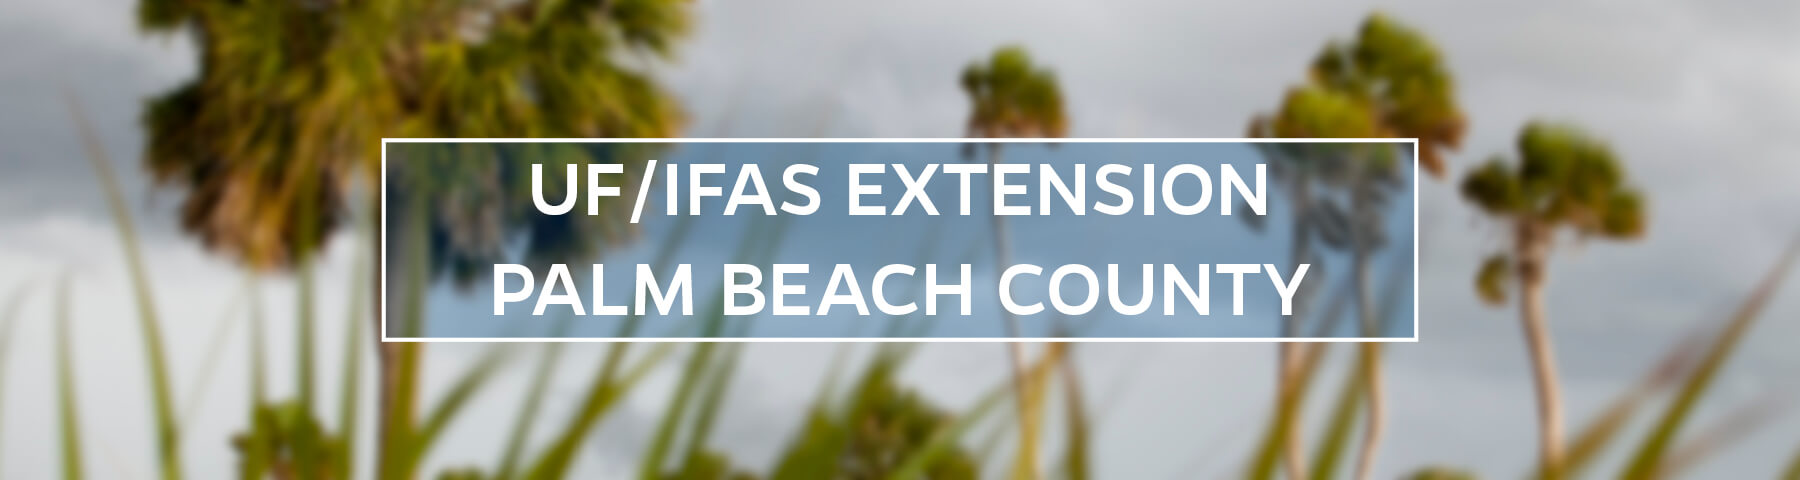 UF/IFAS Extension Palm Beach County